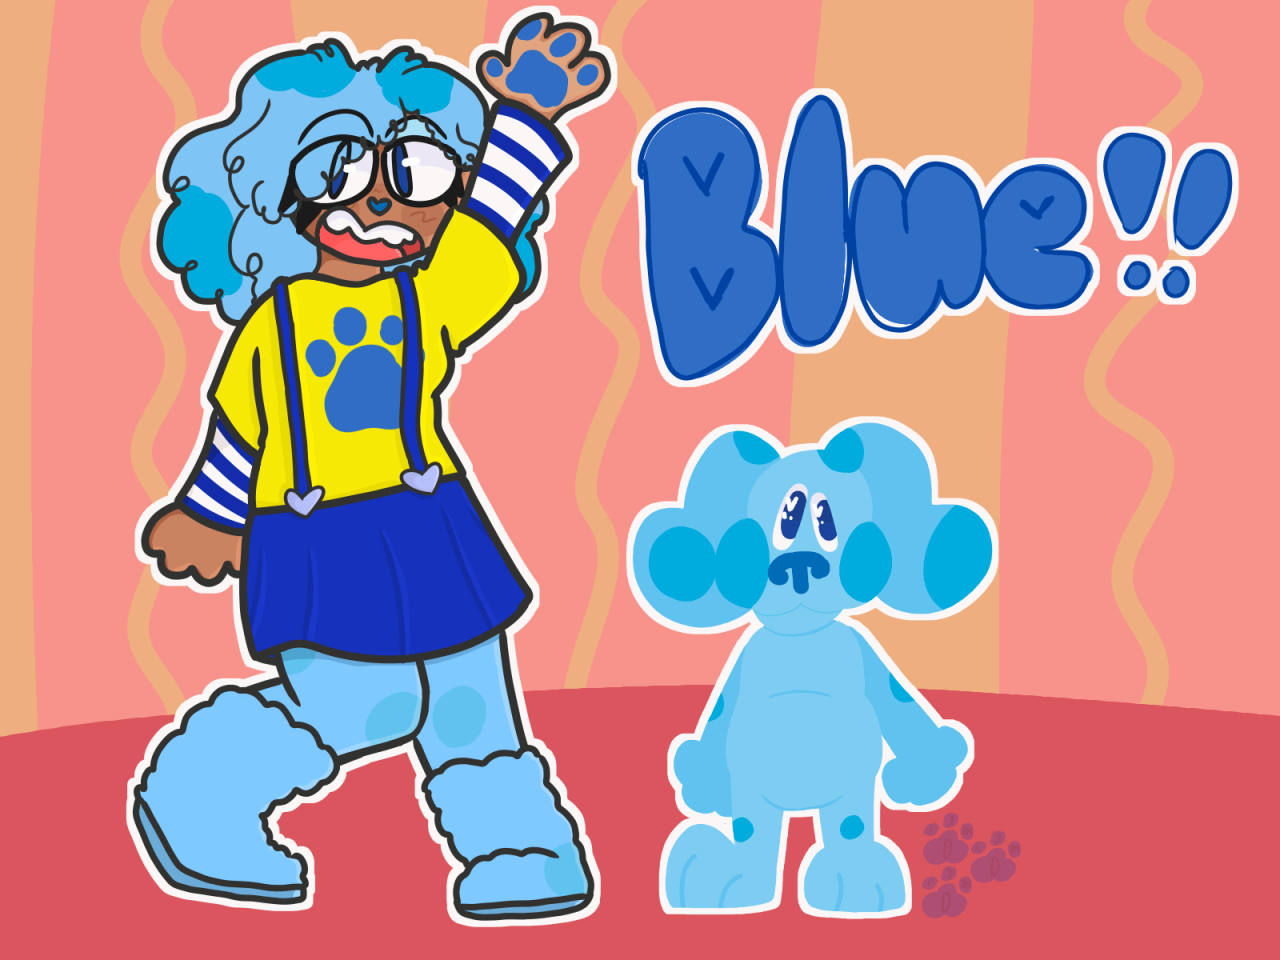 Blue's Clues gets intense for tumblr users